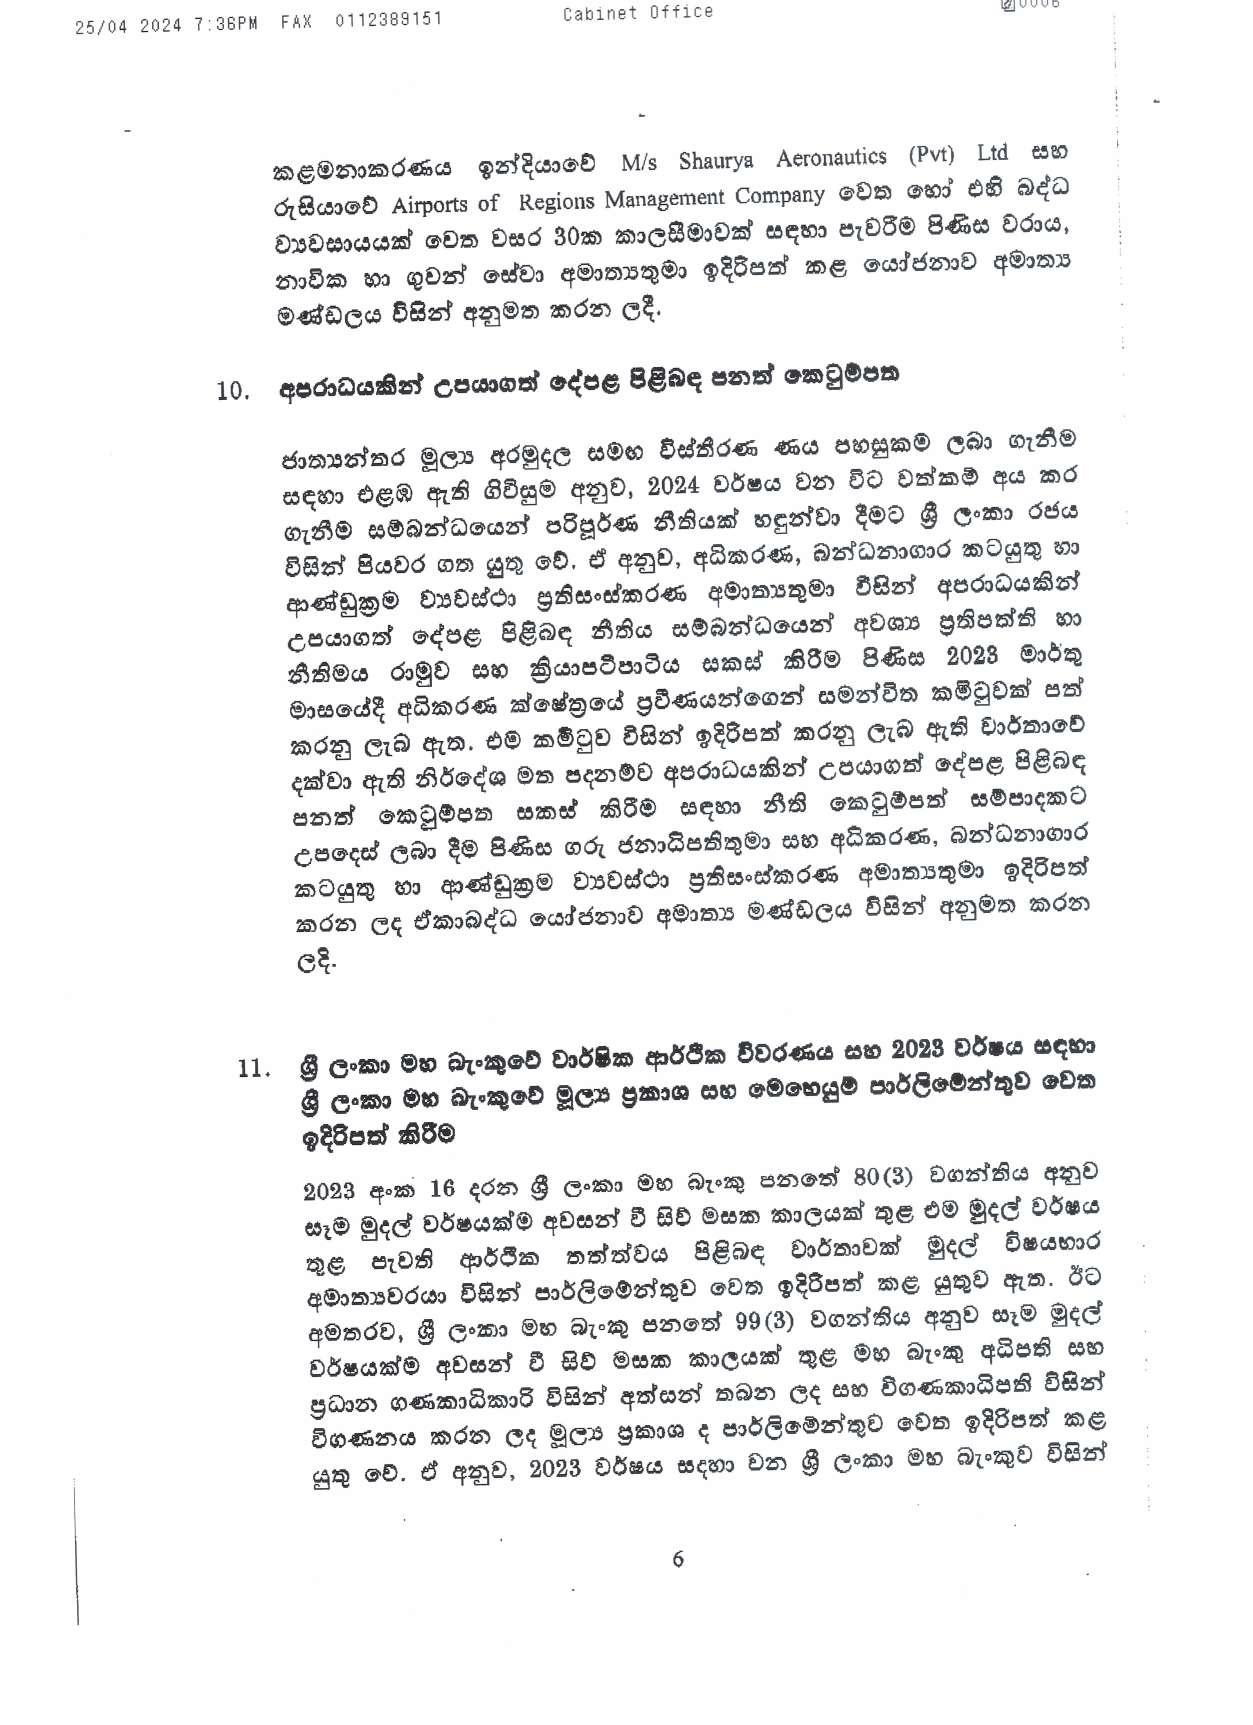 Cabinet Decision on 25.04.2024 page 006